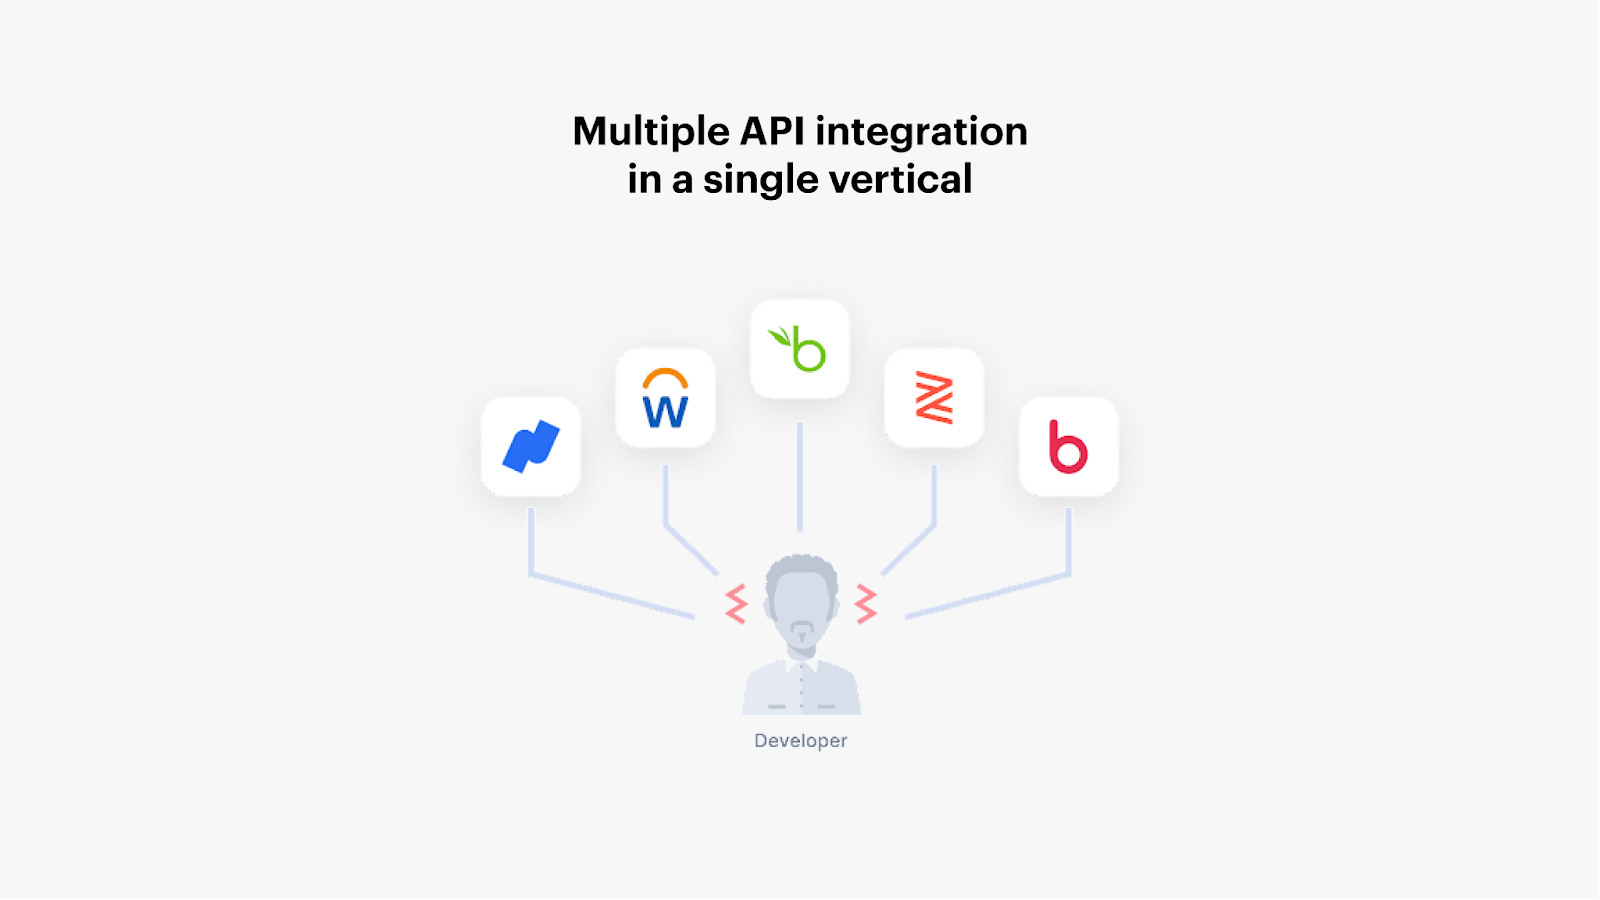 A visual breakdown of integrating multiple APIs in a single vertical